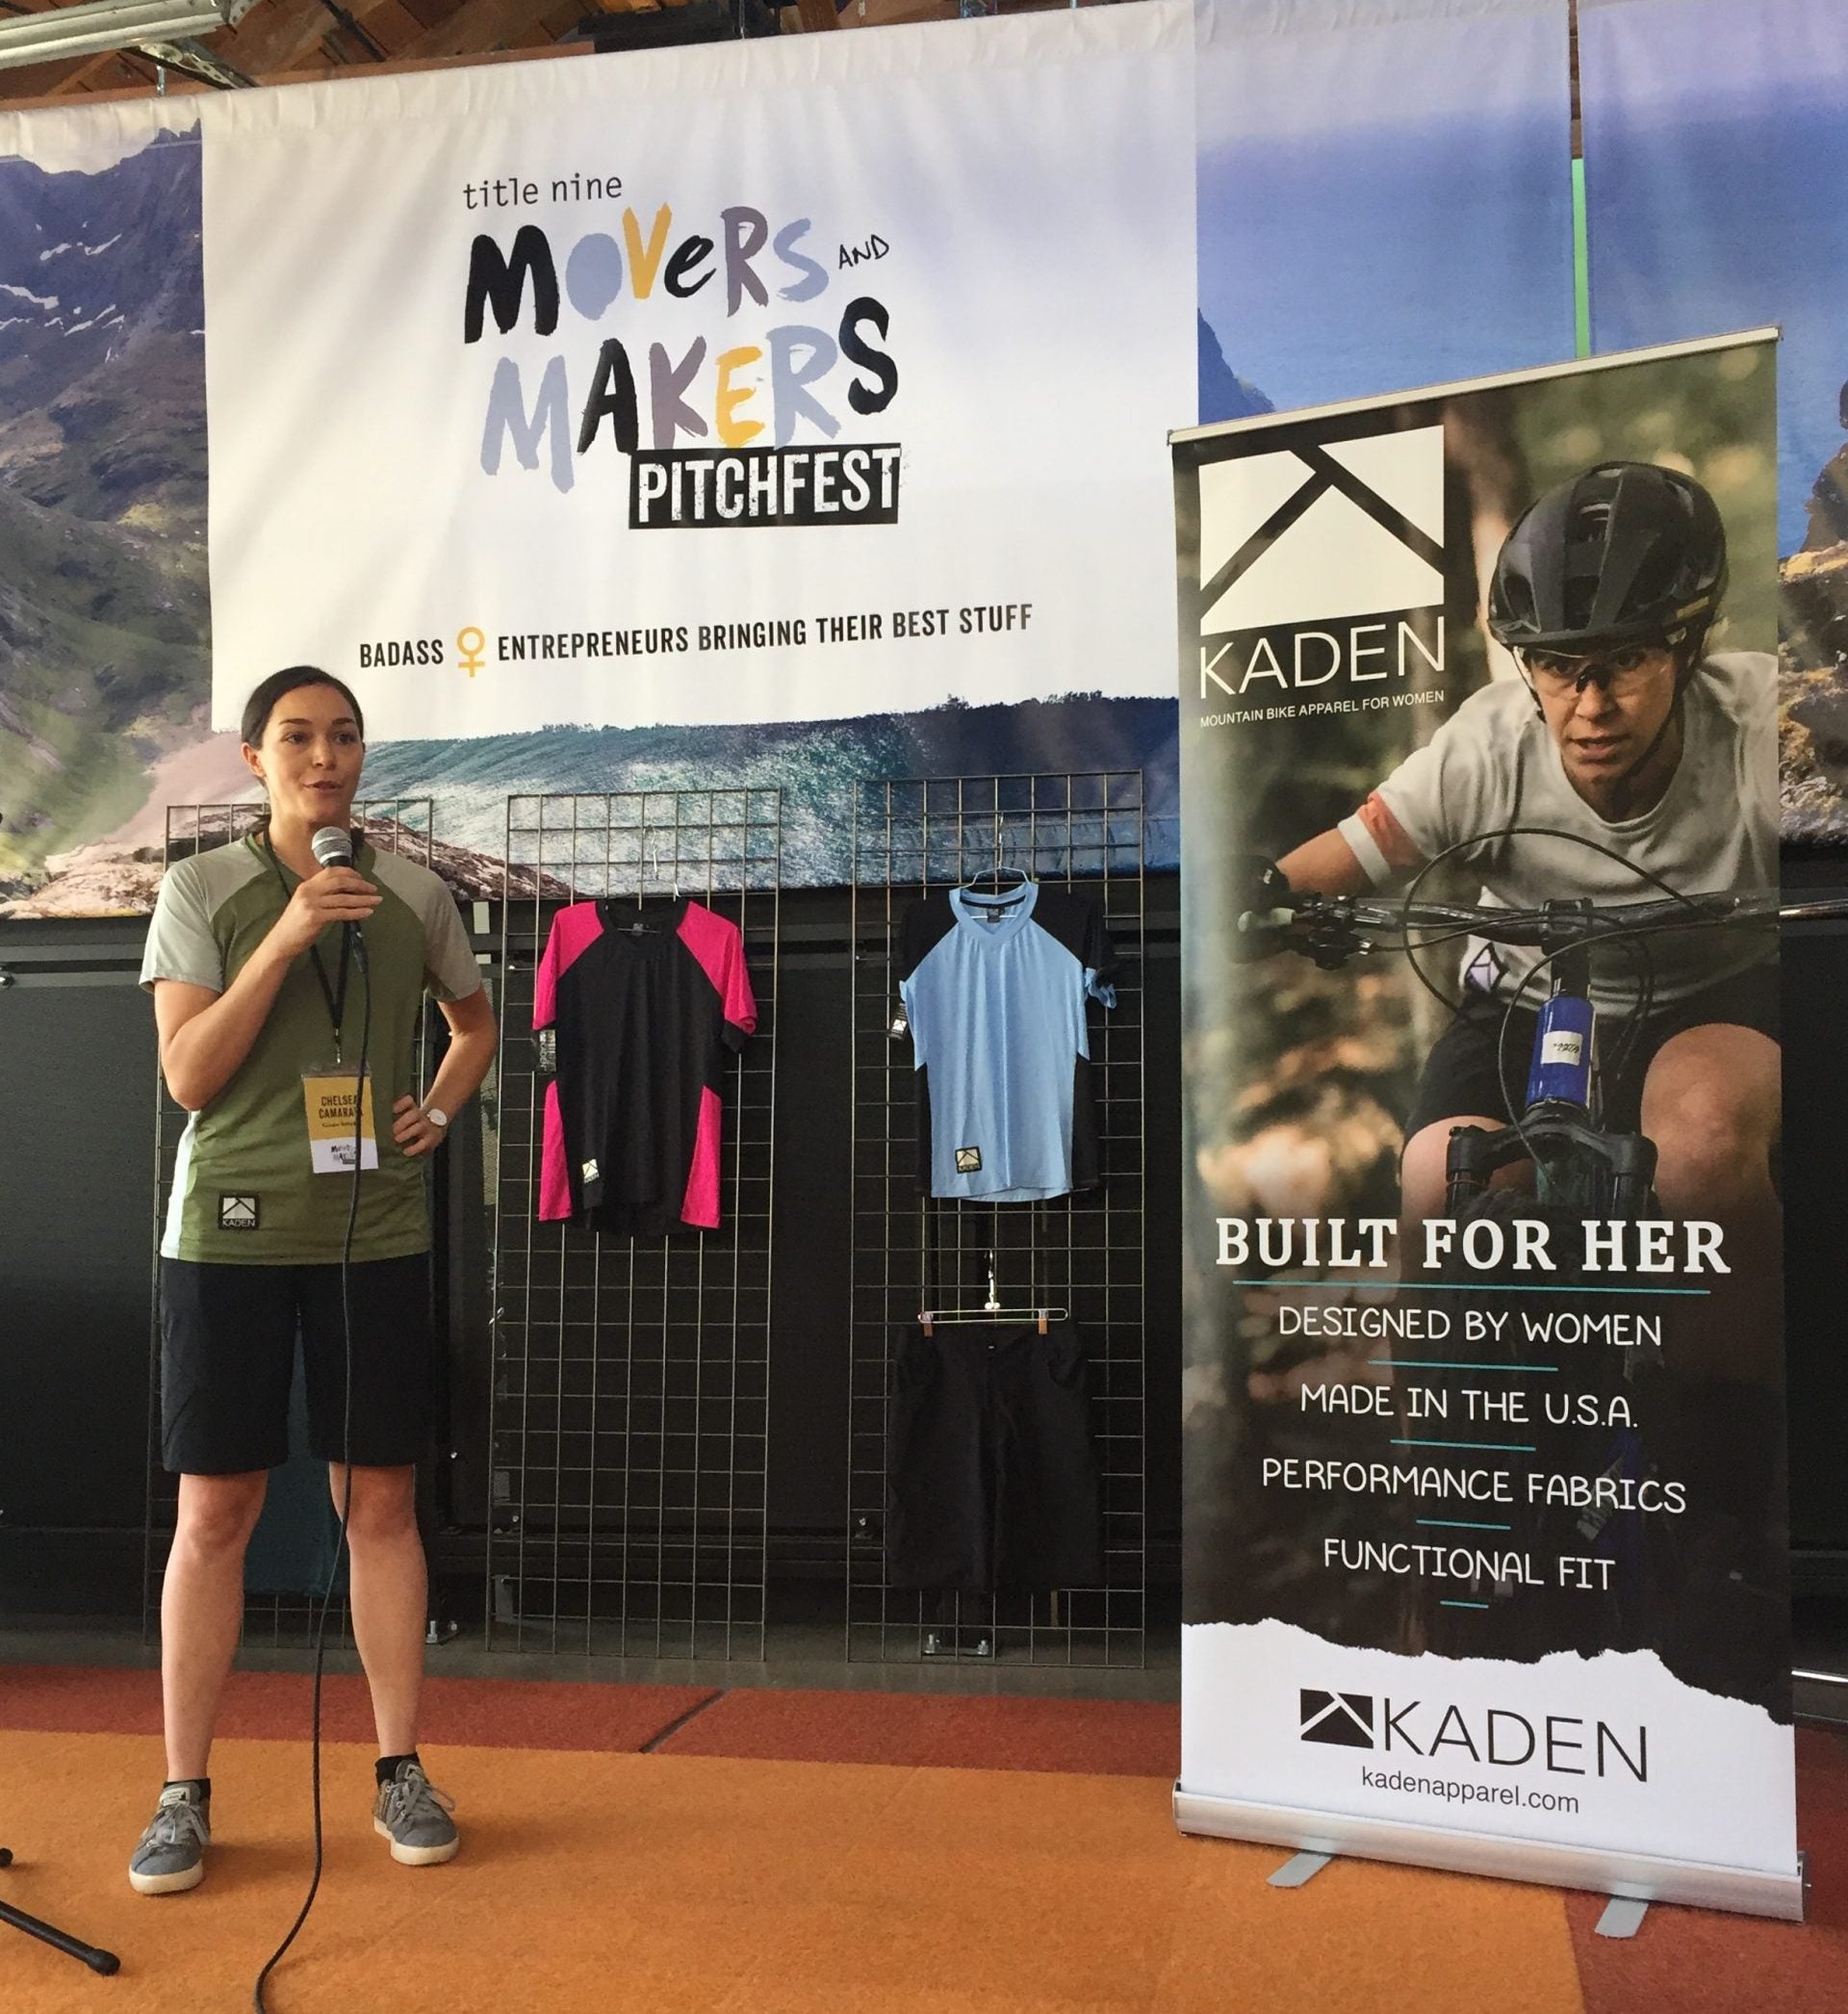 Kaden Selected as Title Nine 2019 Movers & Makers Pitchfest Finalist - Kaden Pitch Image